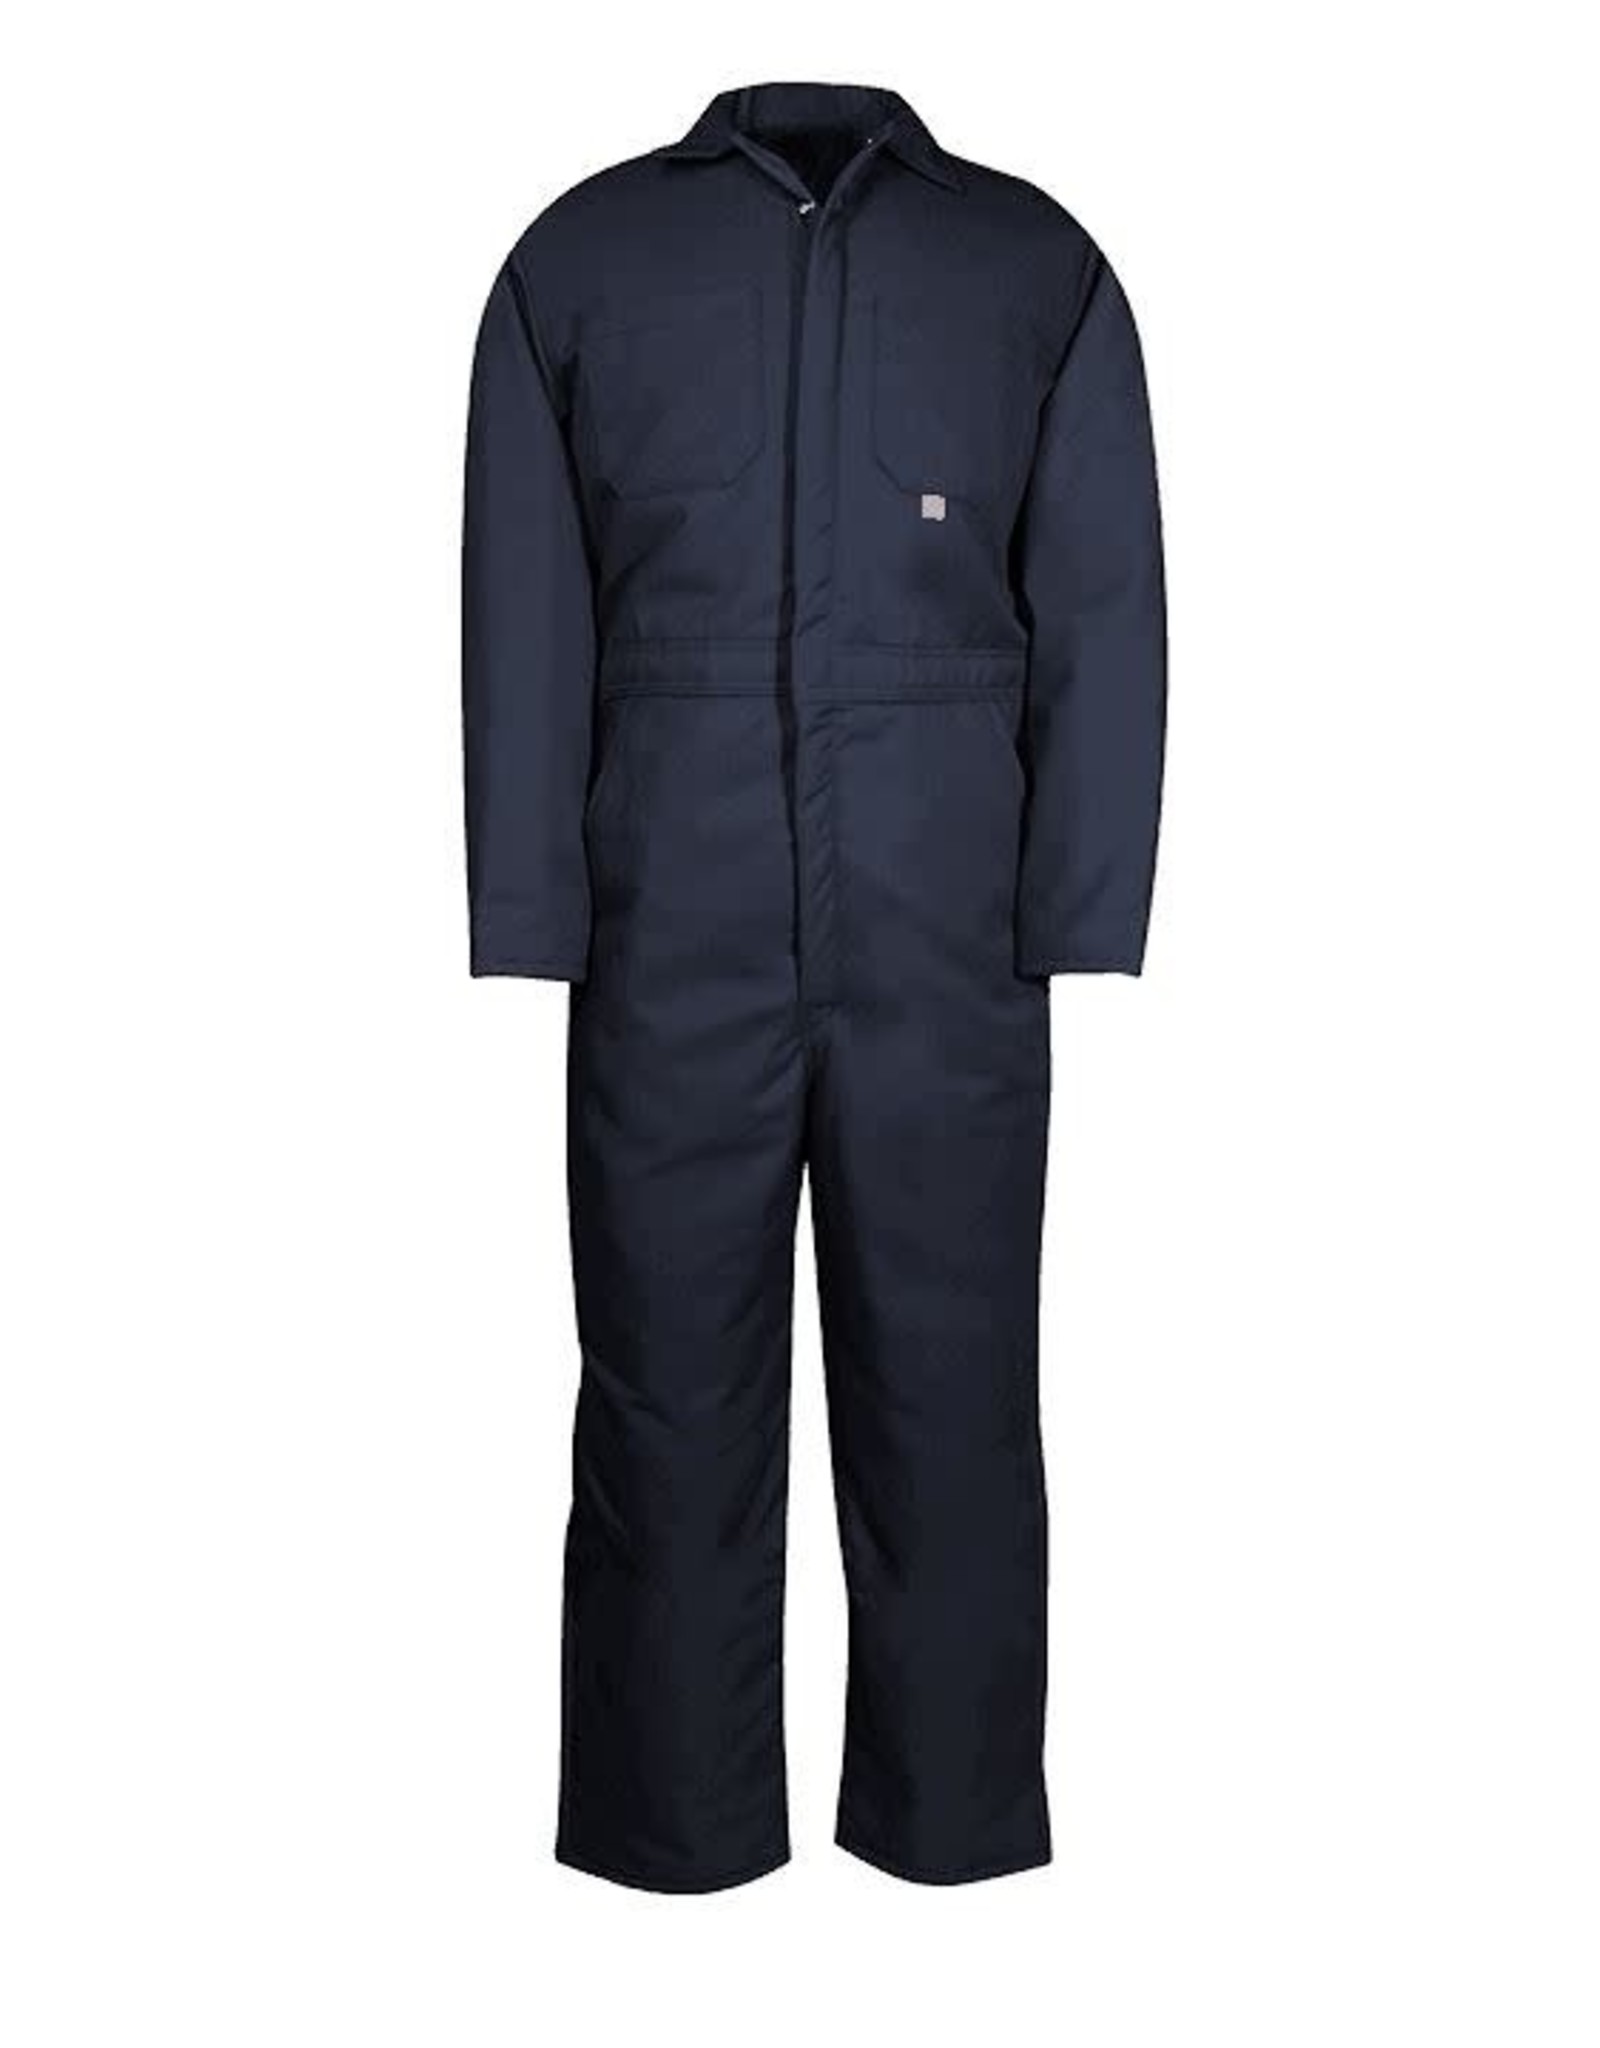 Big Bill Big Bill Quilted/Insulated Coverall, Navy